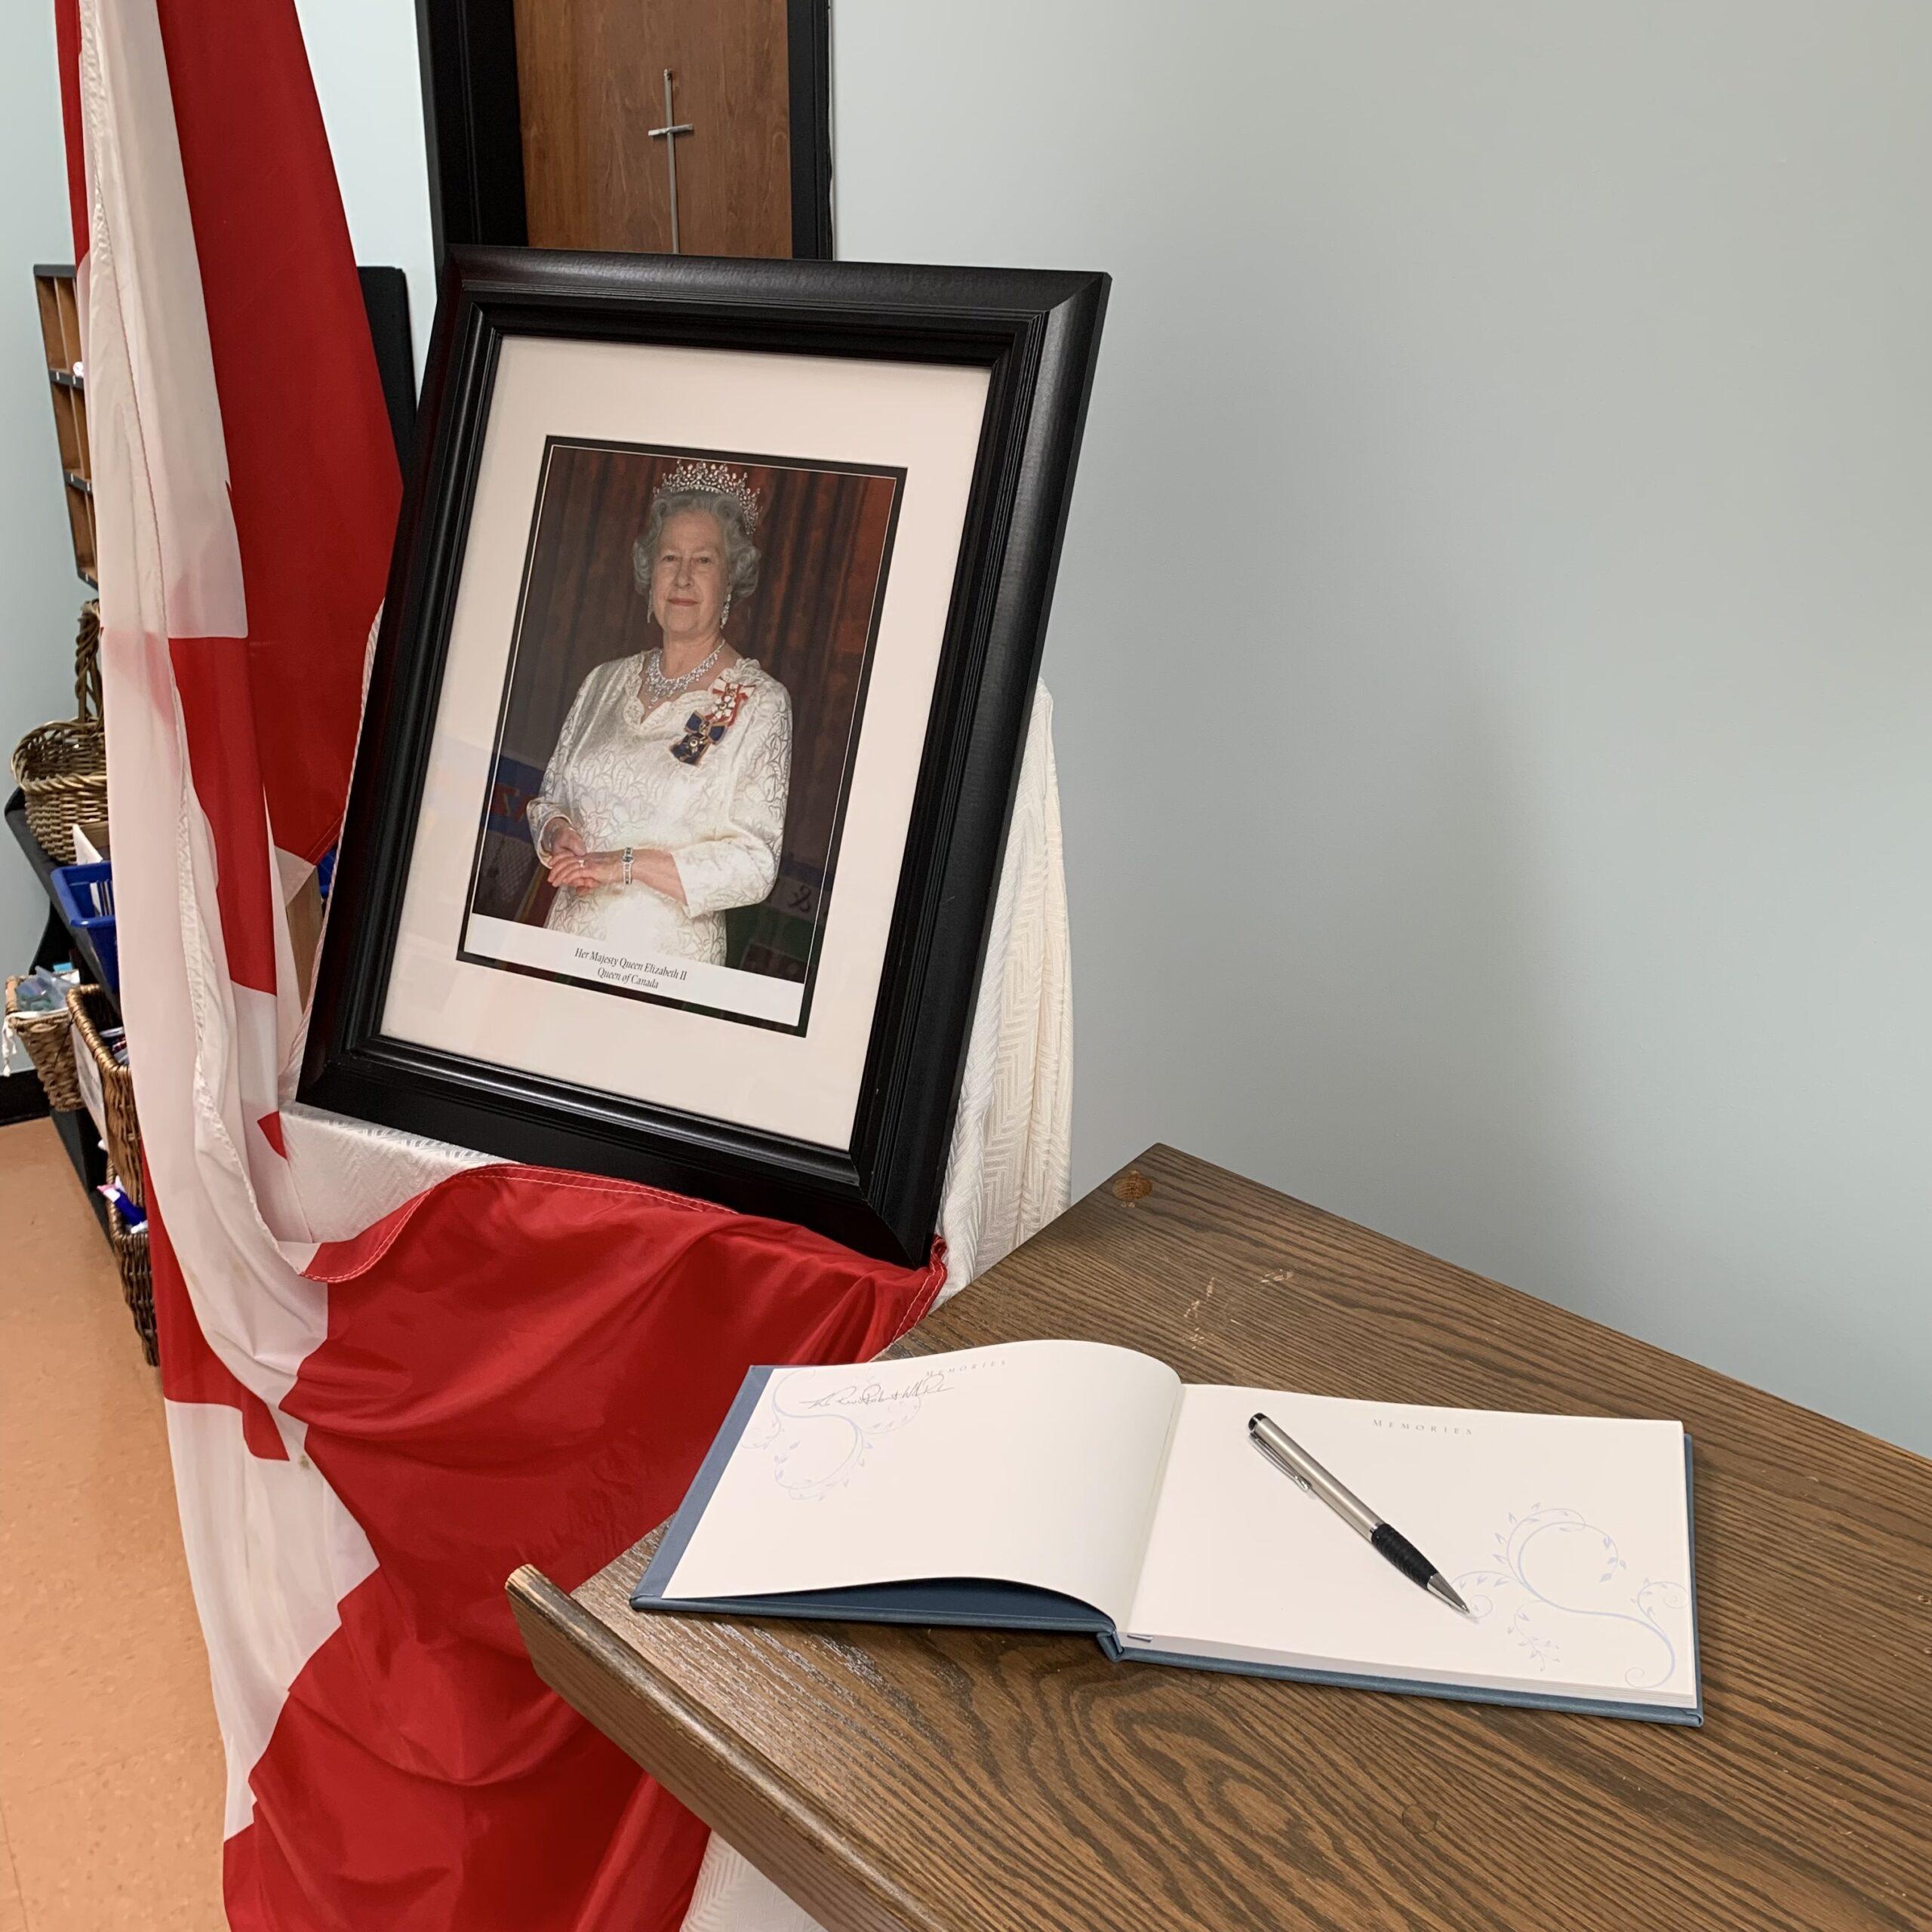 Book of Condolences For Her Late Majesty